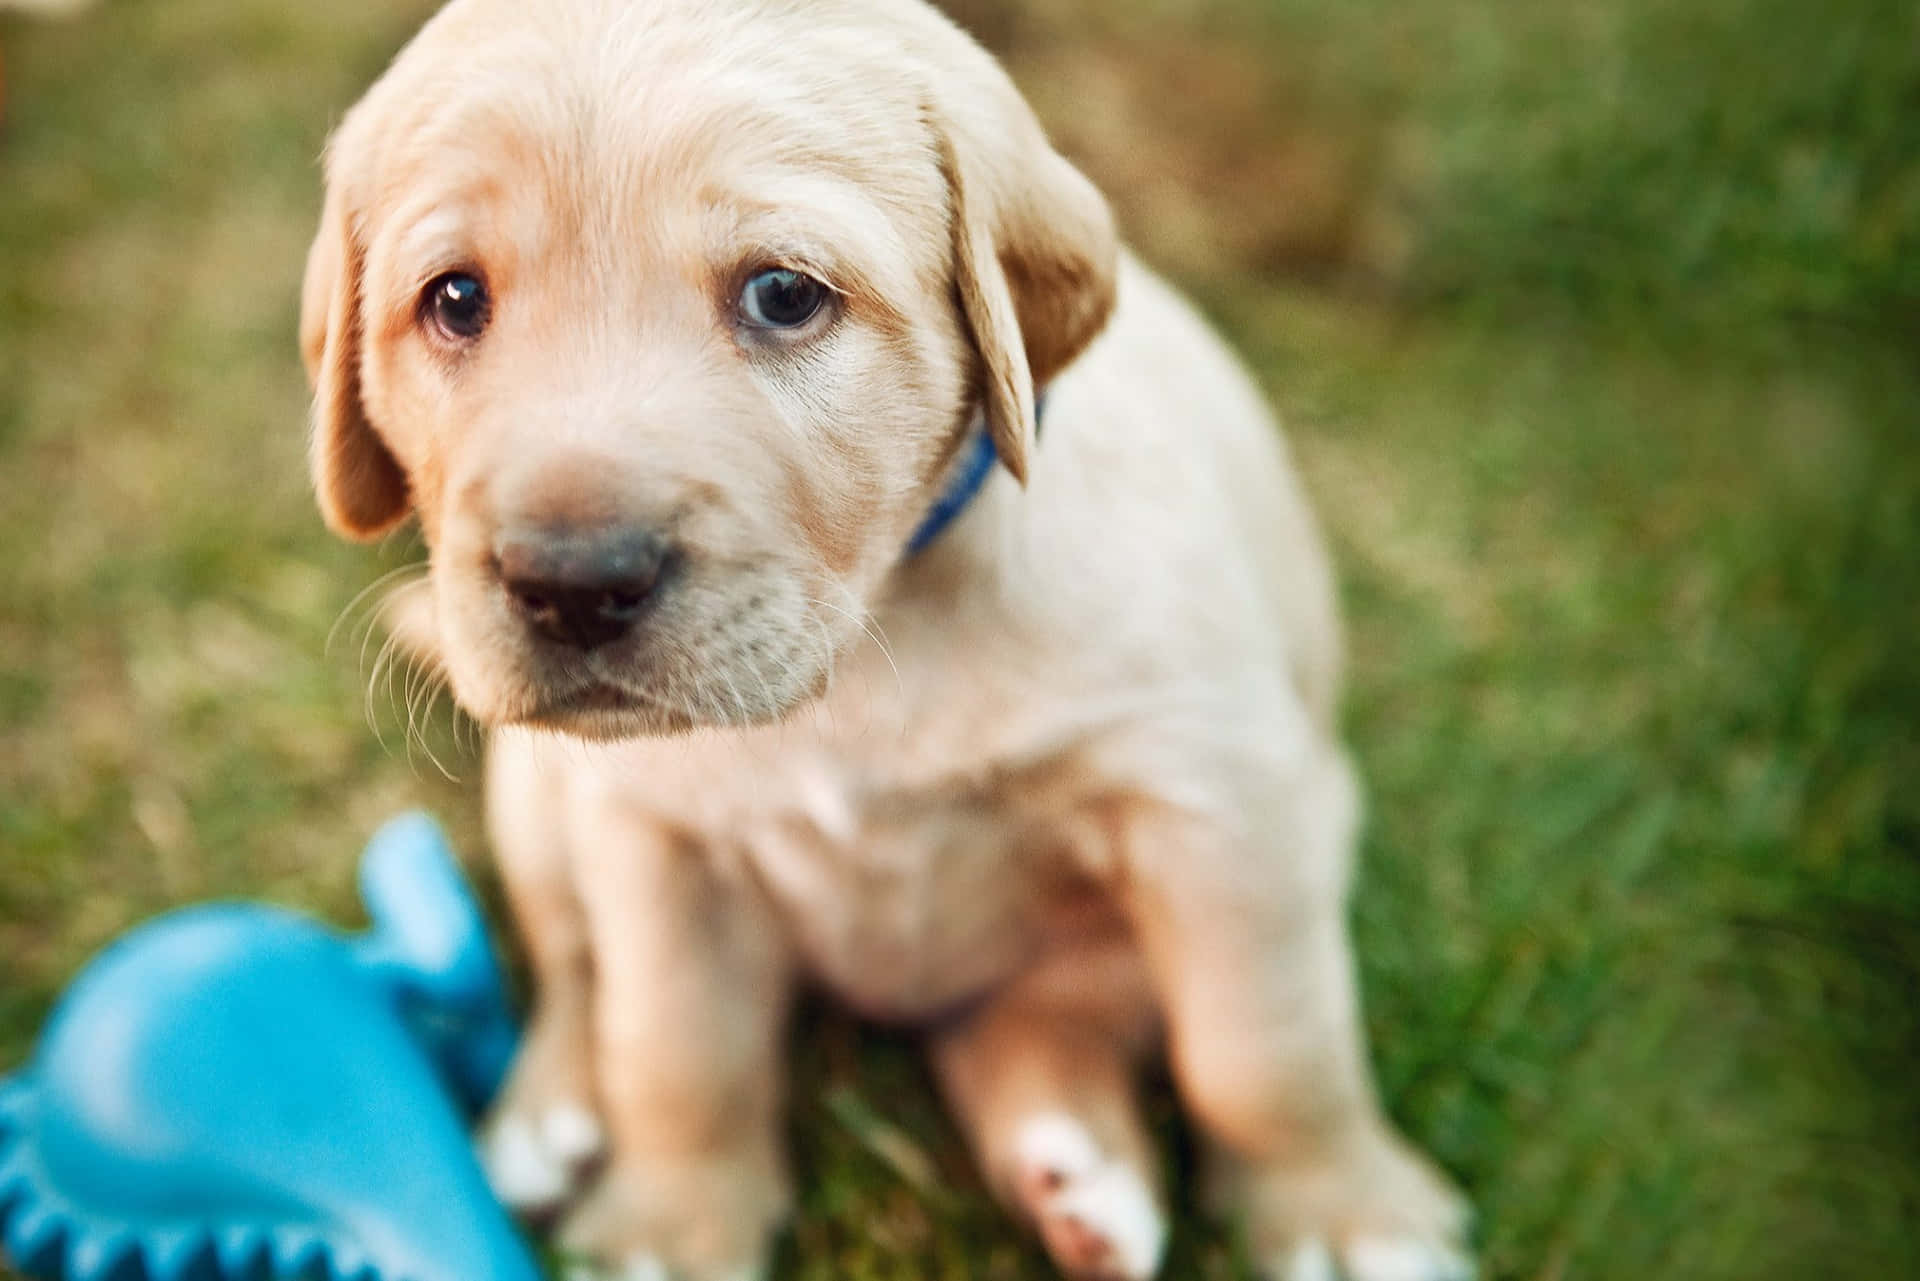 A Puppy Is Sitting On The Grass With A Blue Toy